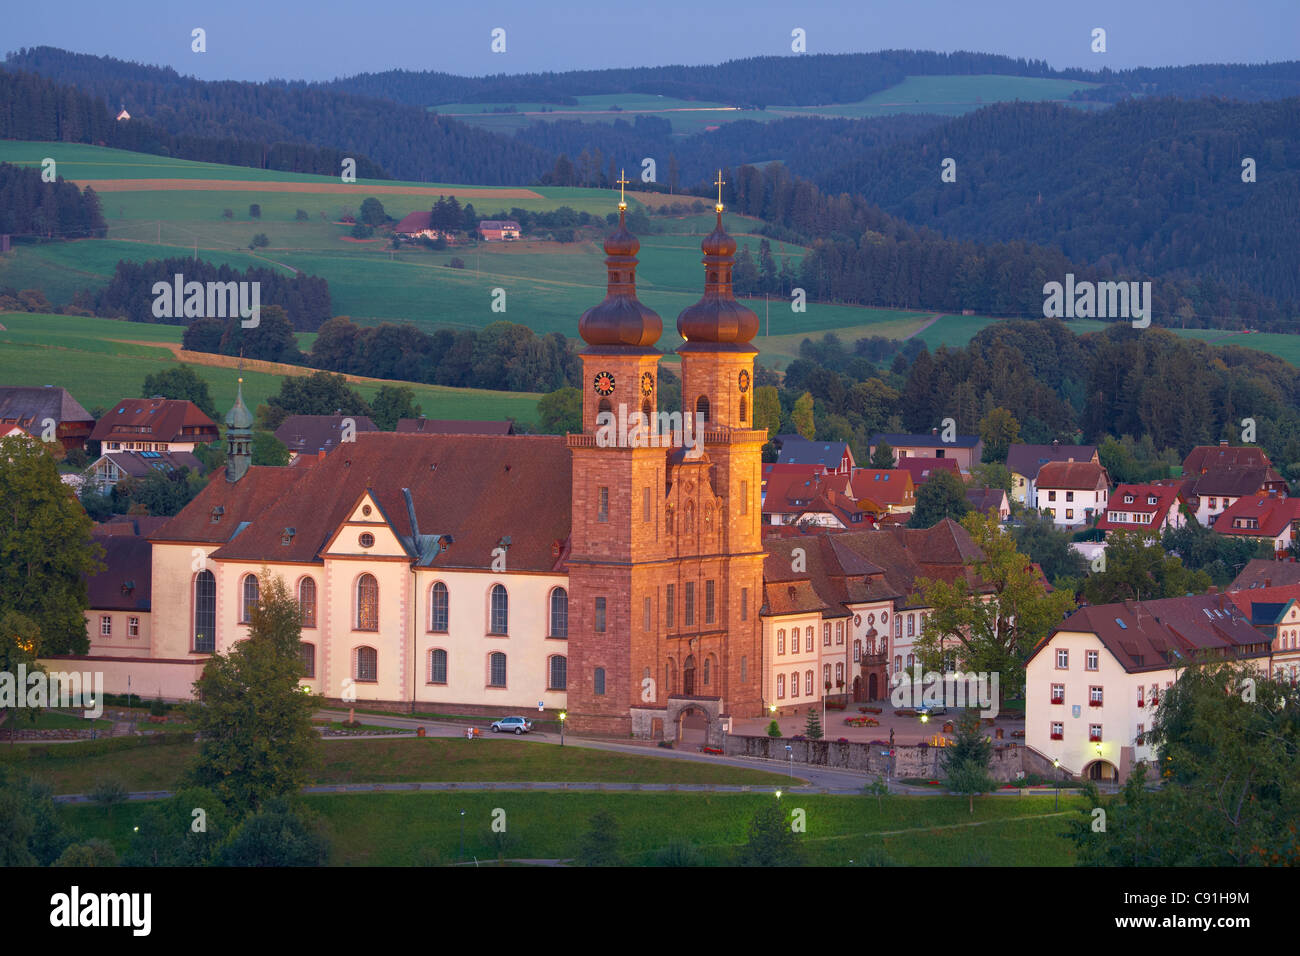 Village of St. Peter with abbey Architekt Peter Thumb Southern Part of Black Forest Black Forest Baden-Wuerttemberg Germany Euro Stock Photo